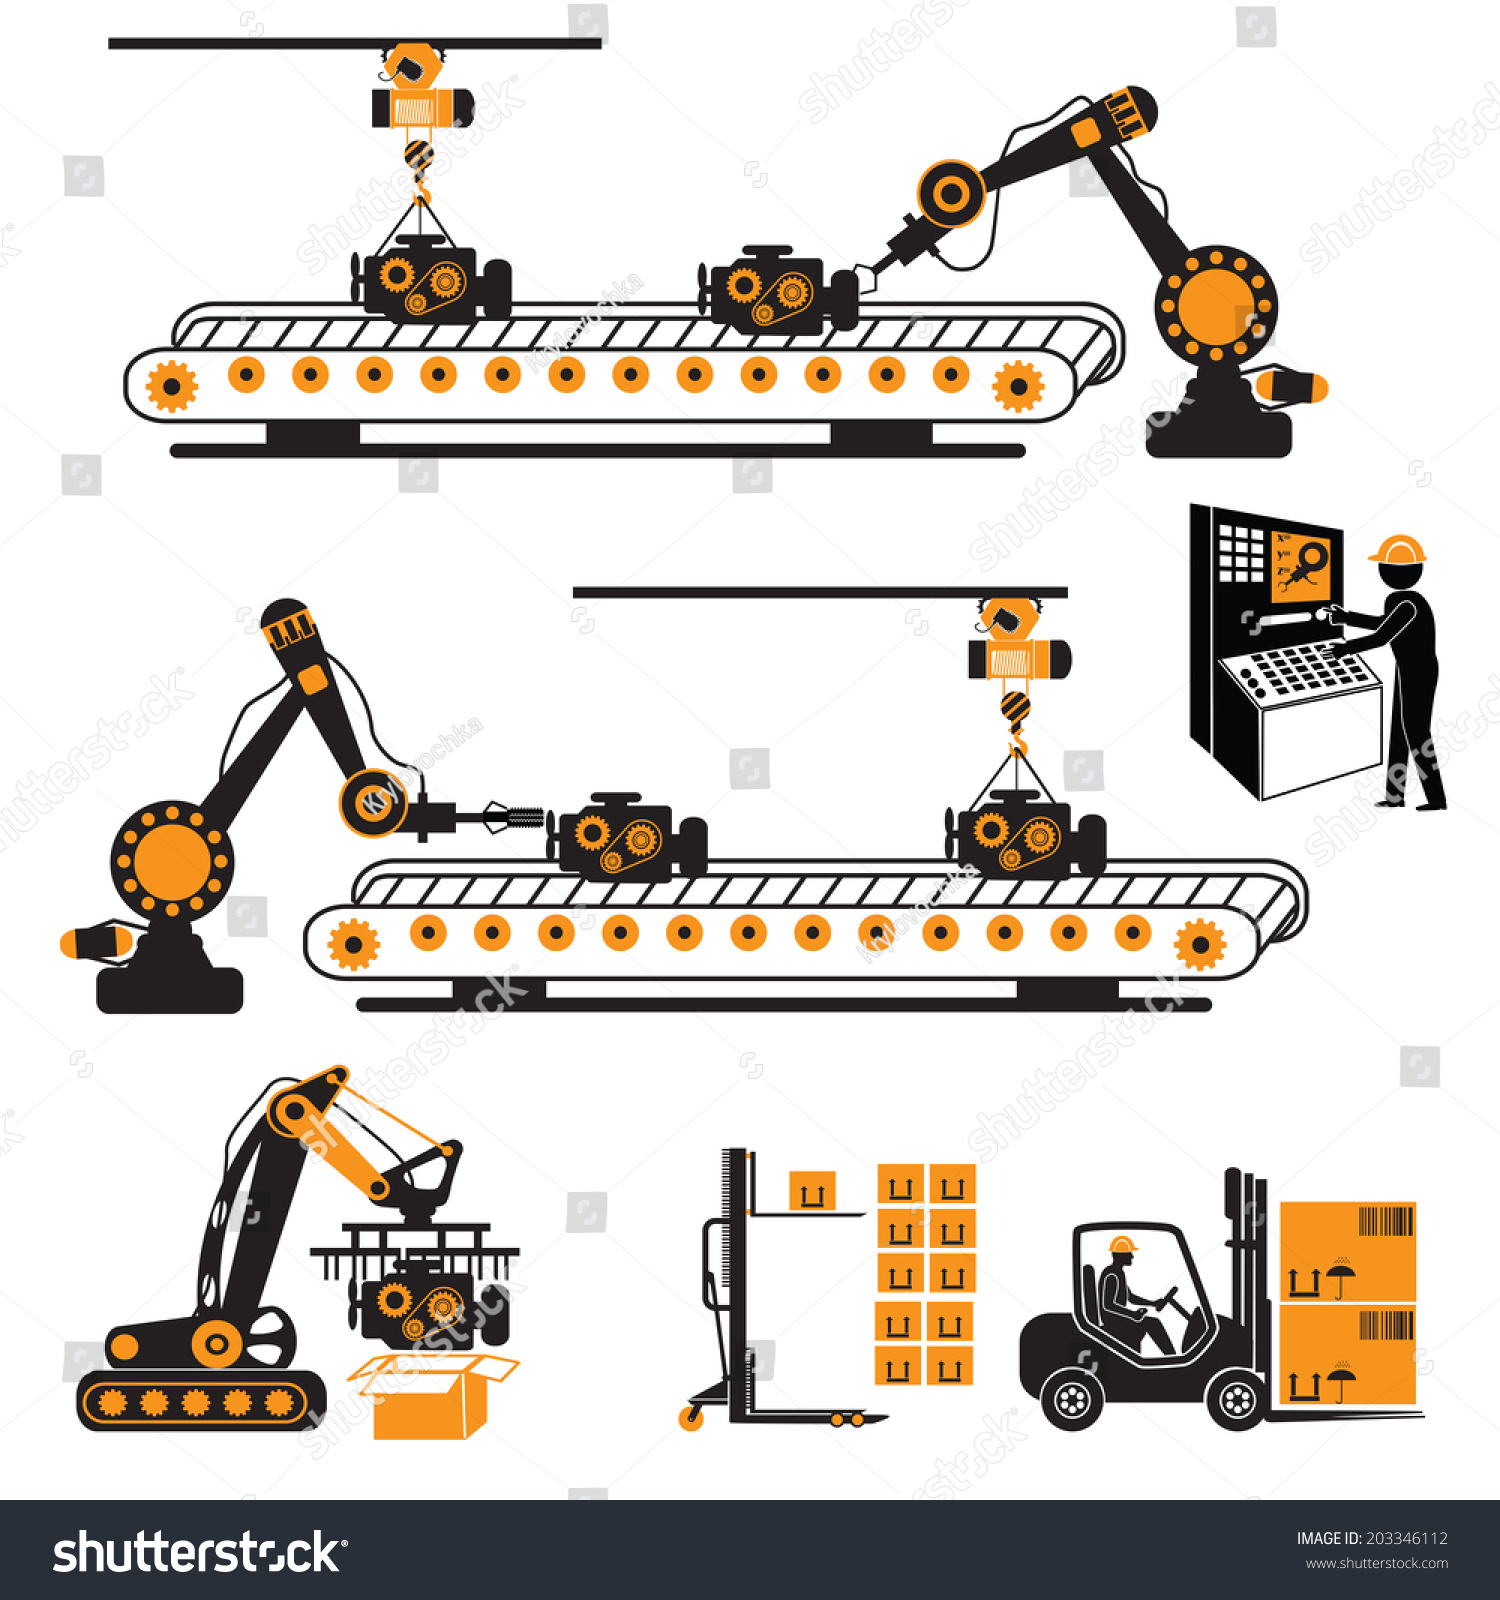 industrial automation clipart - photo #7